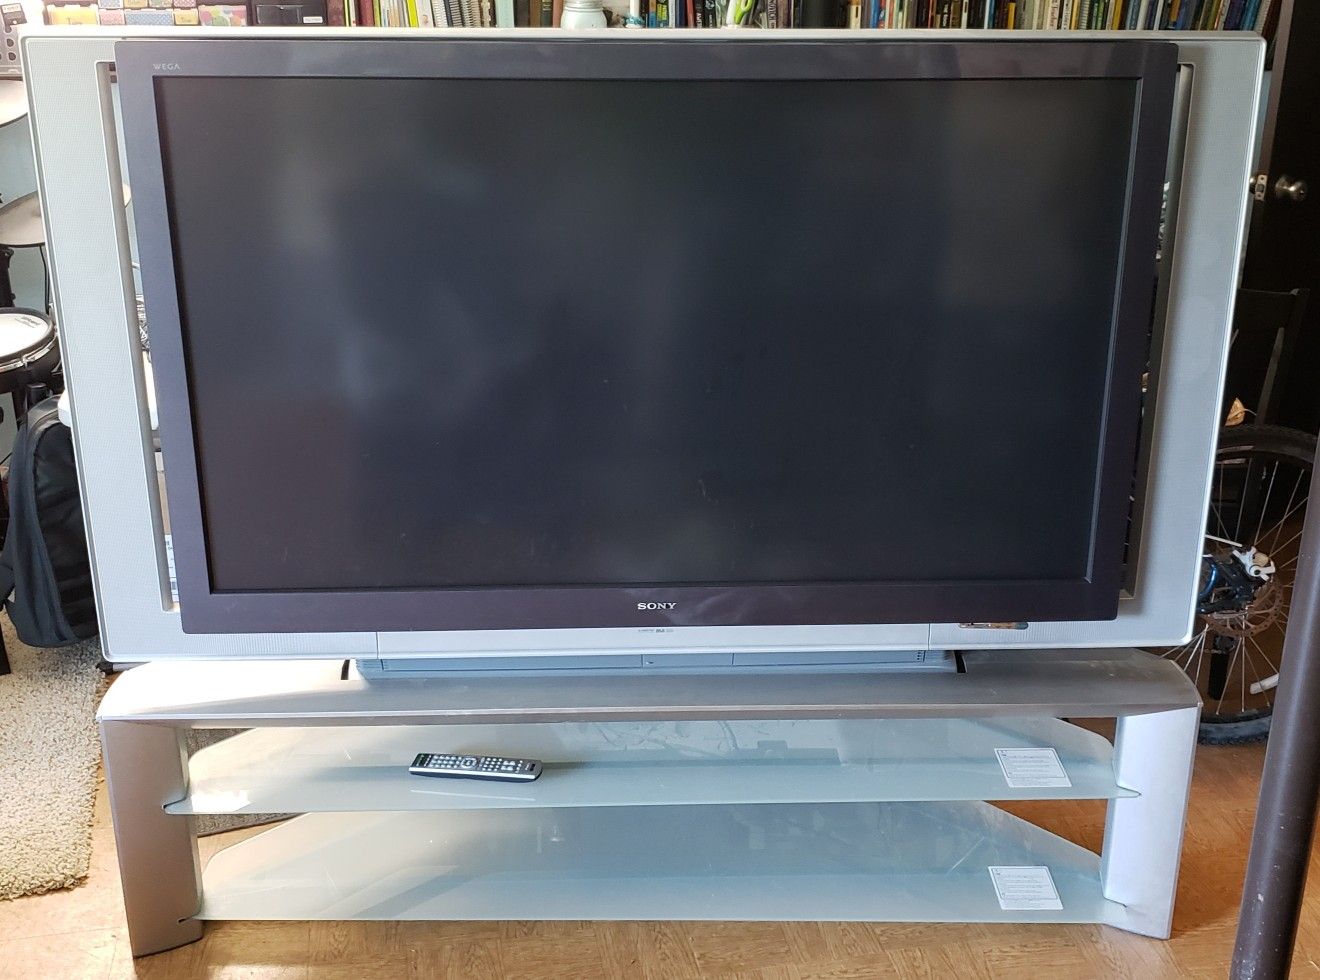 Sony 60" LCD projection HDTV with stand